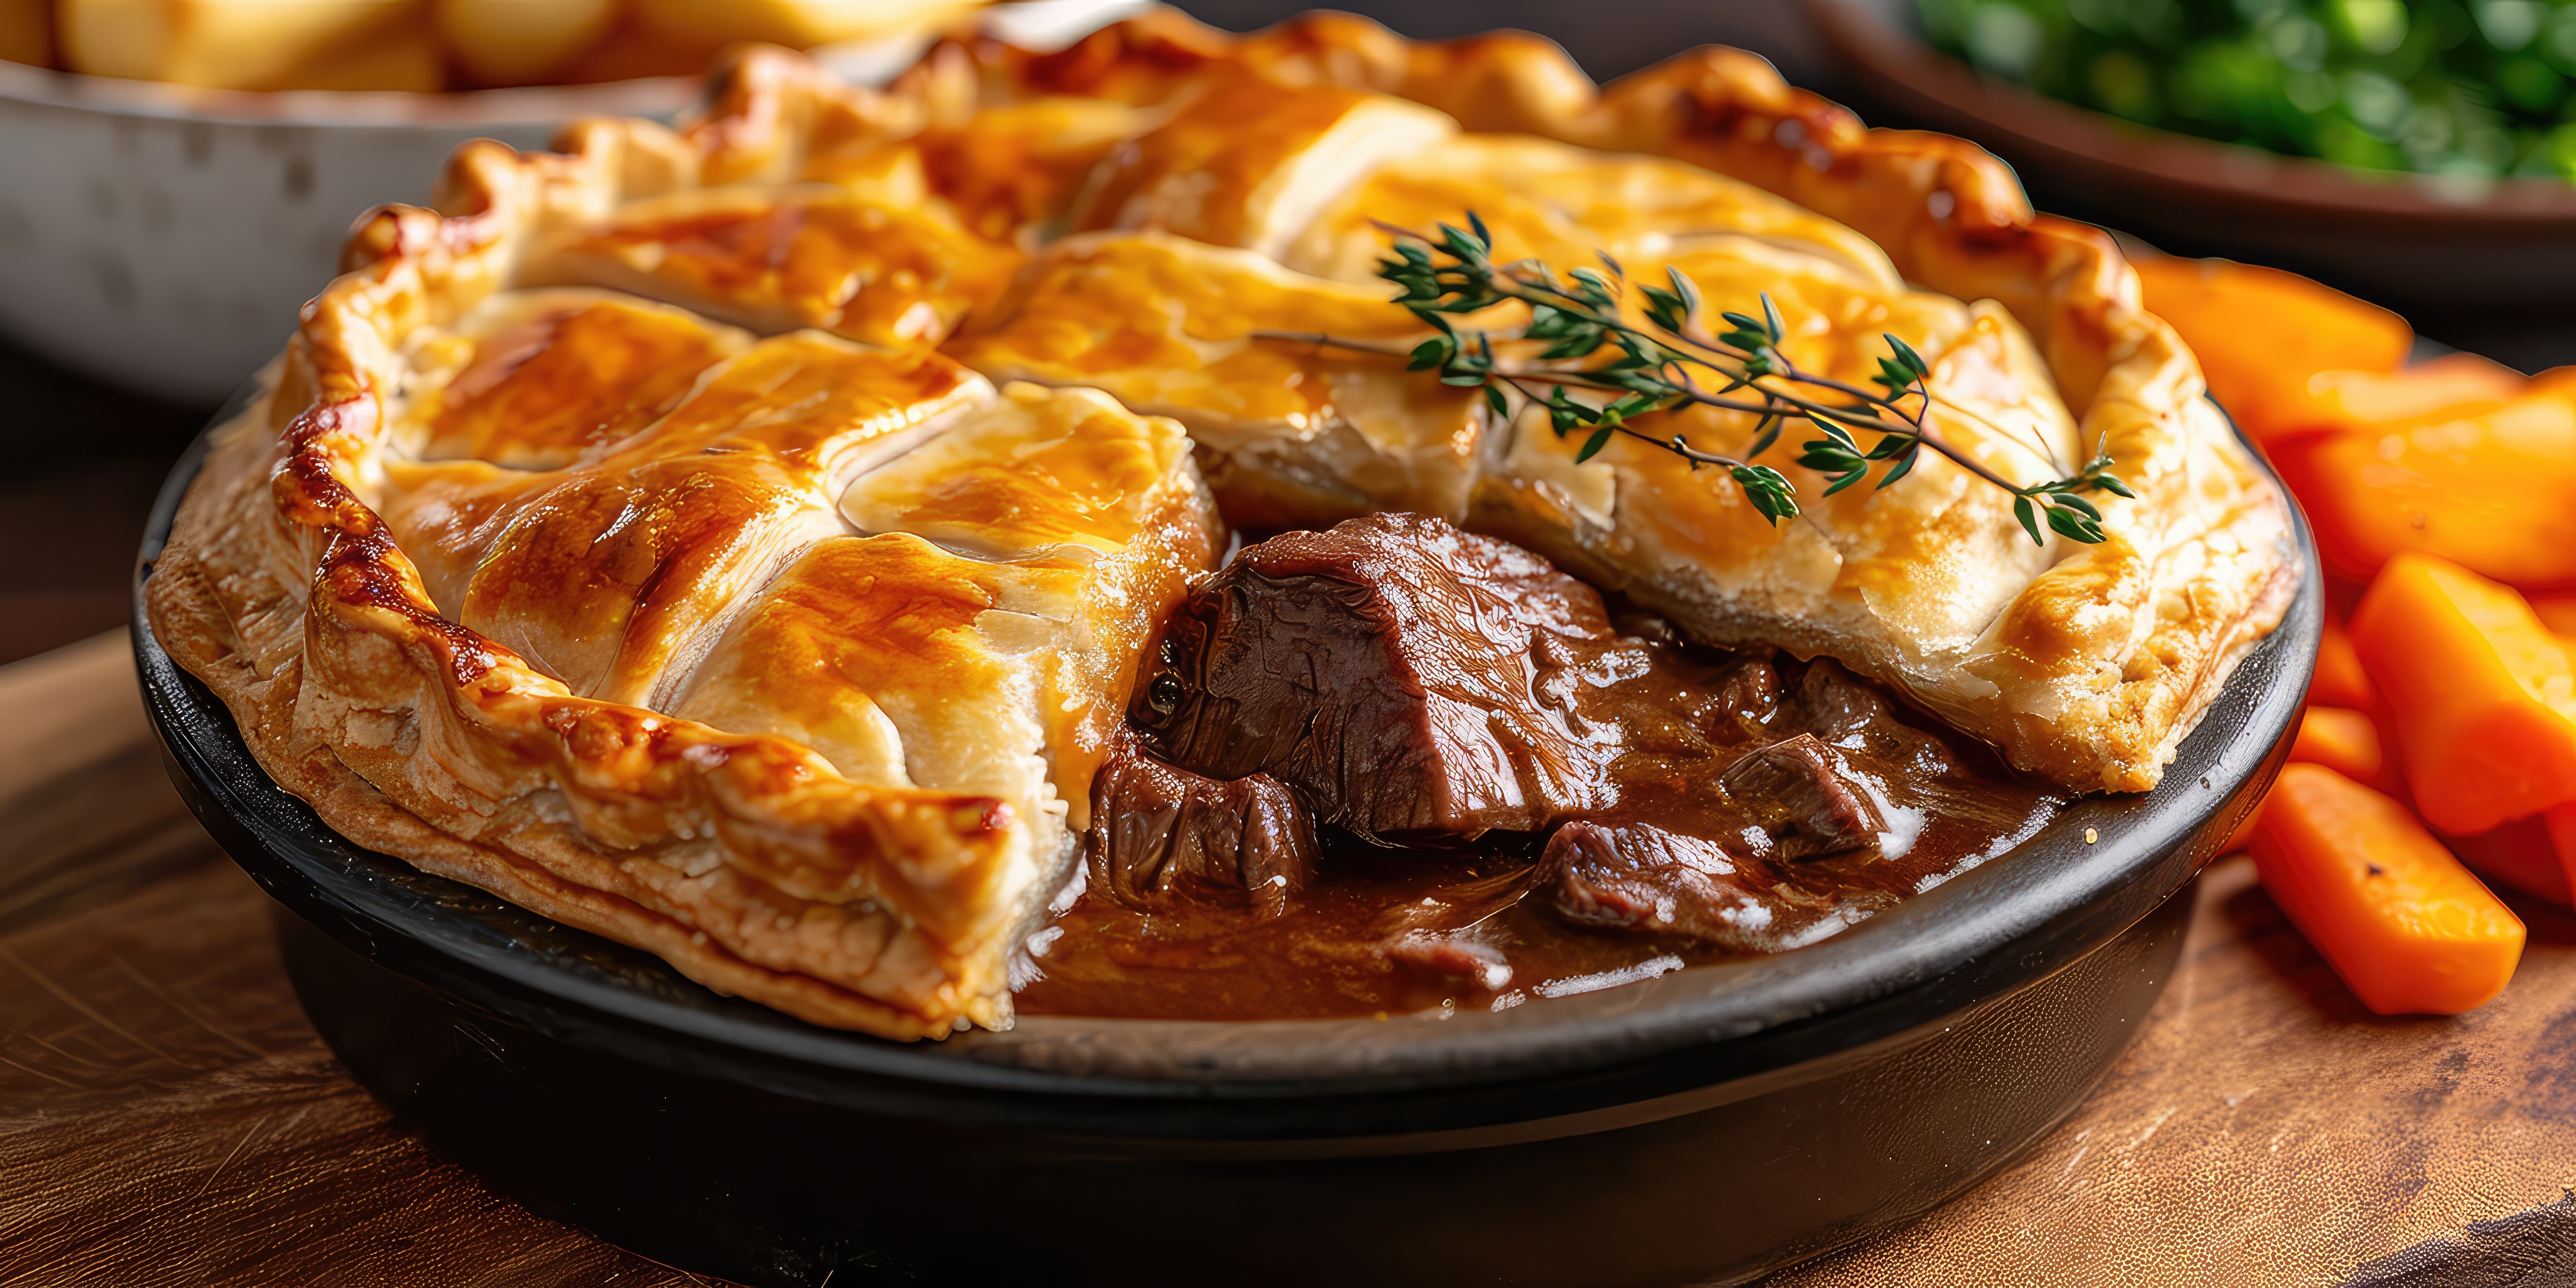 A close up of a steak pie with golden crust